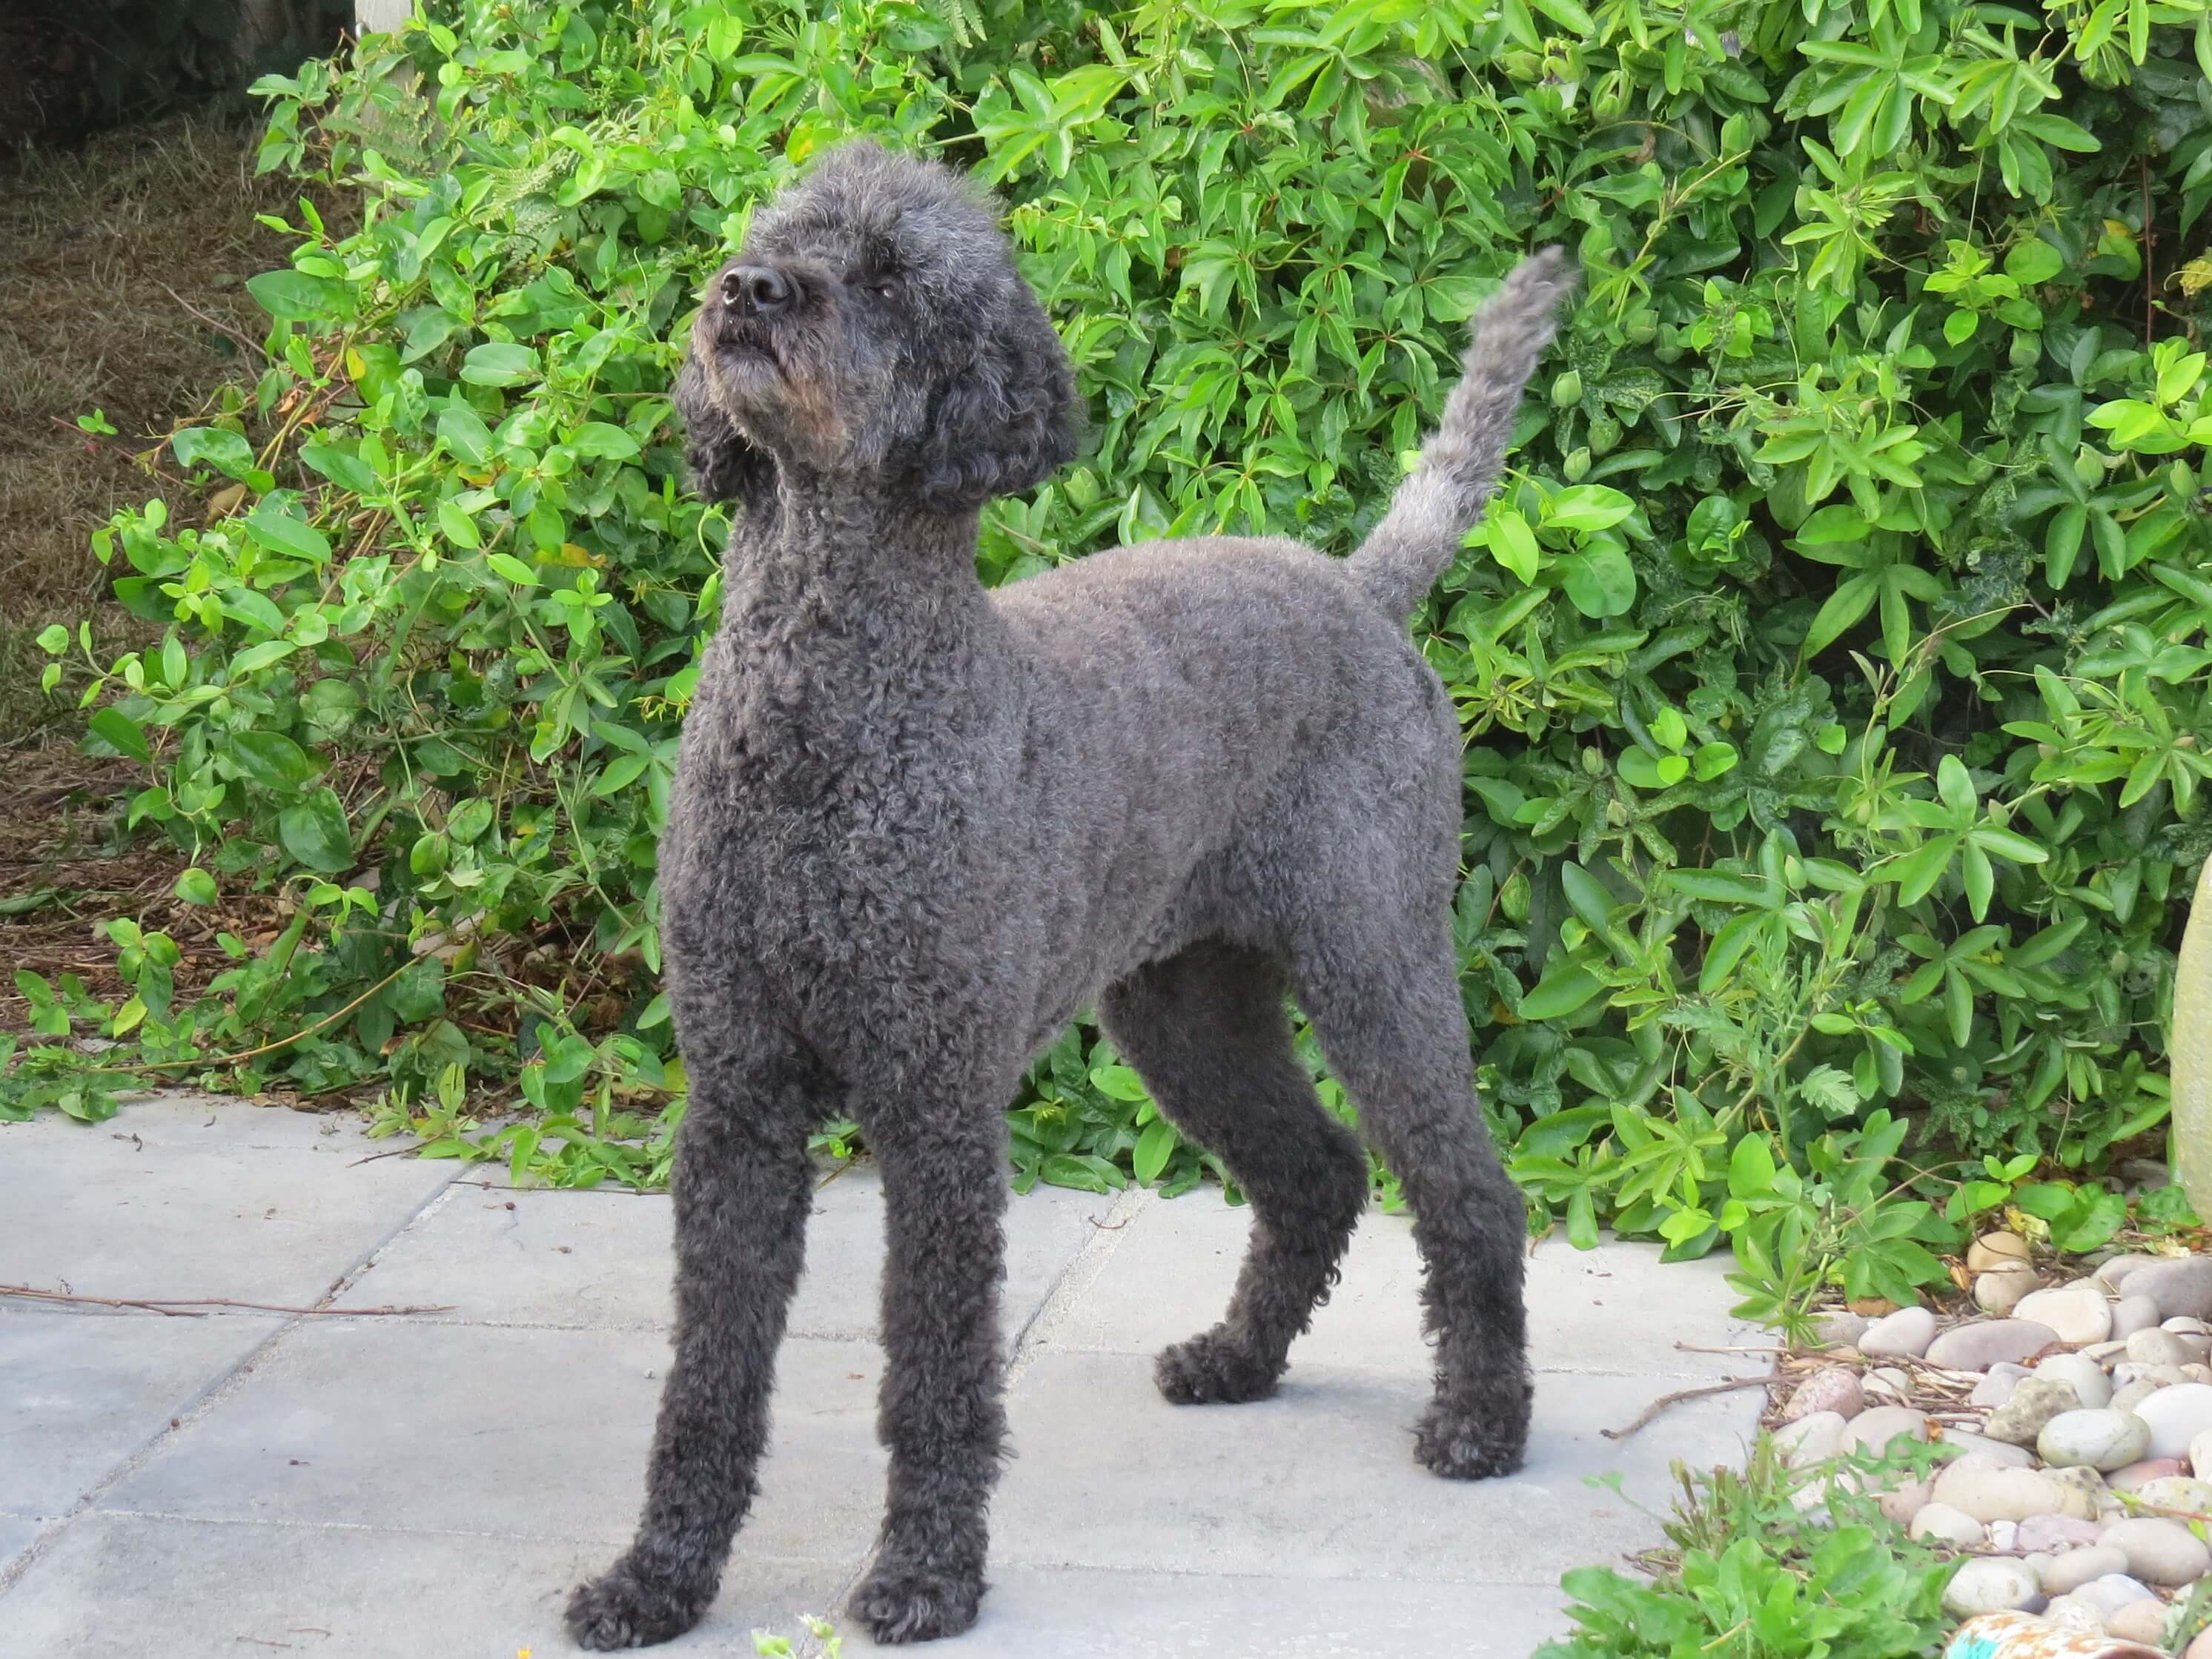 A grey poodle-coated dogs stands in a garden looking into the distance